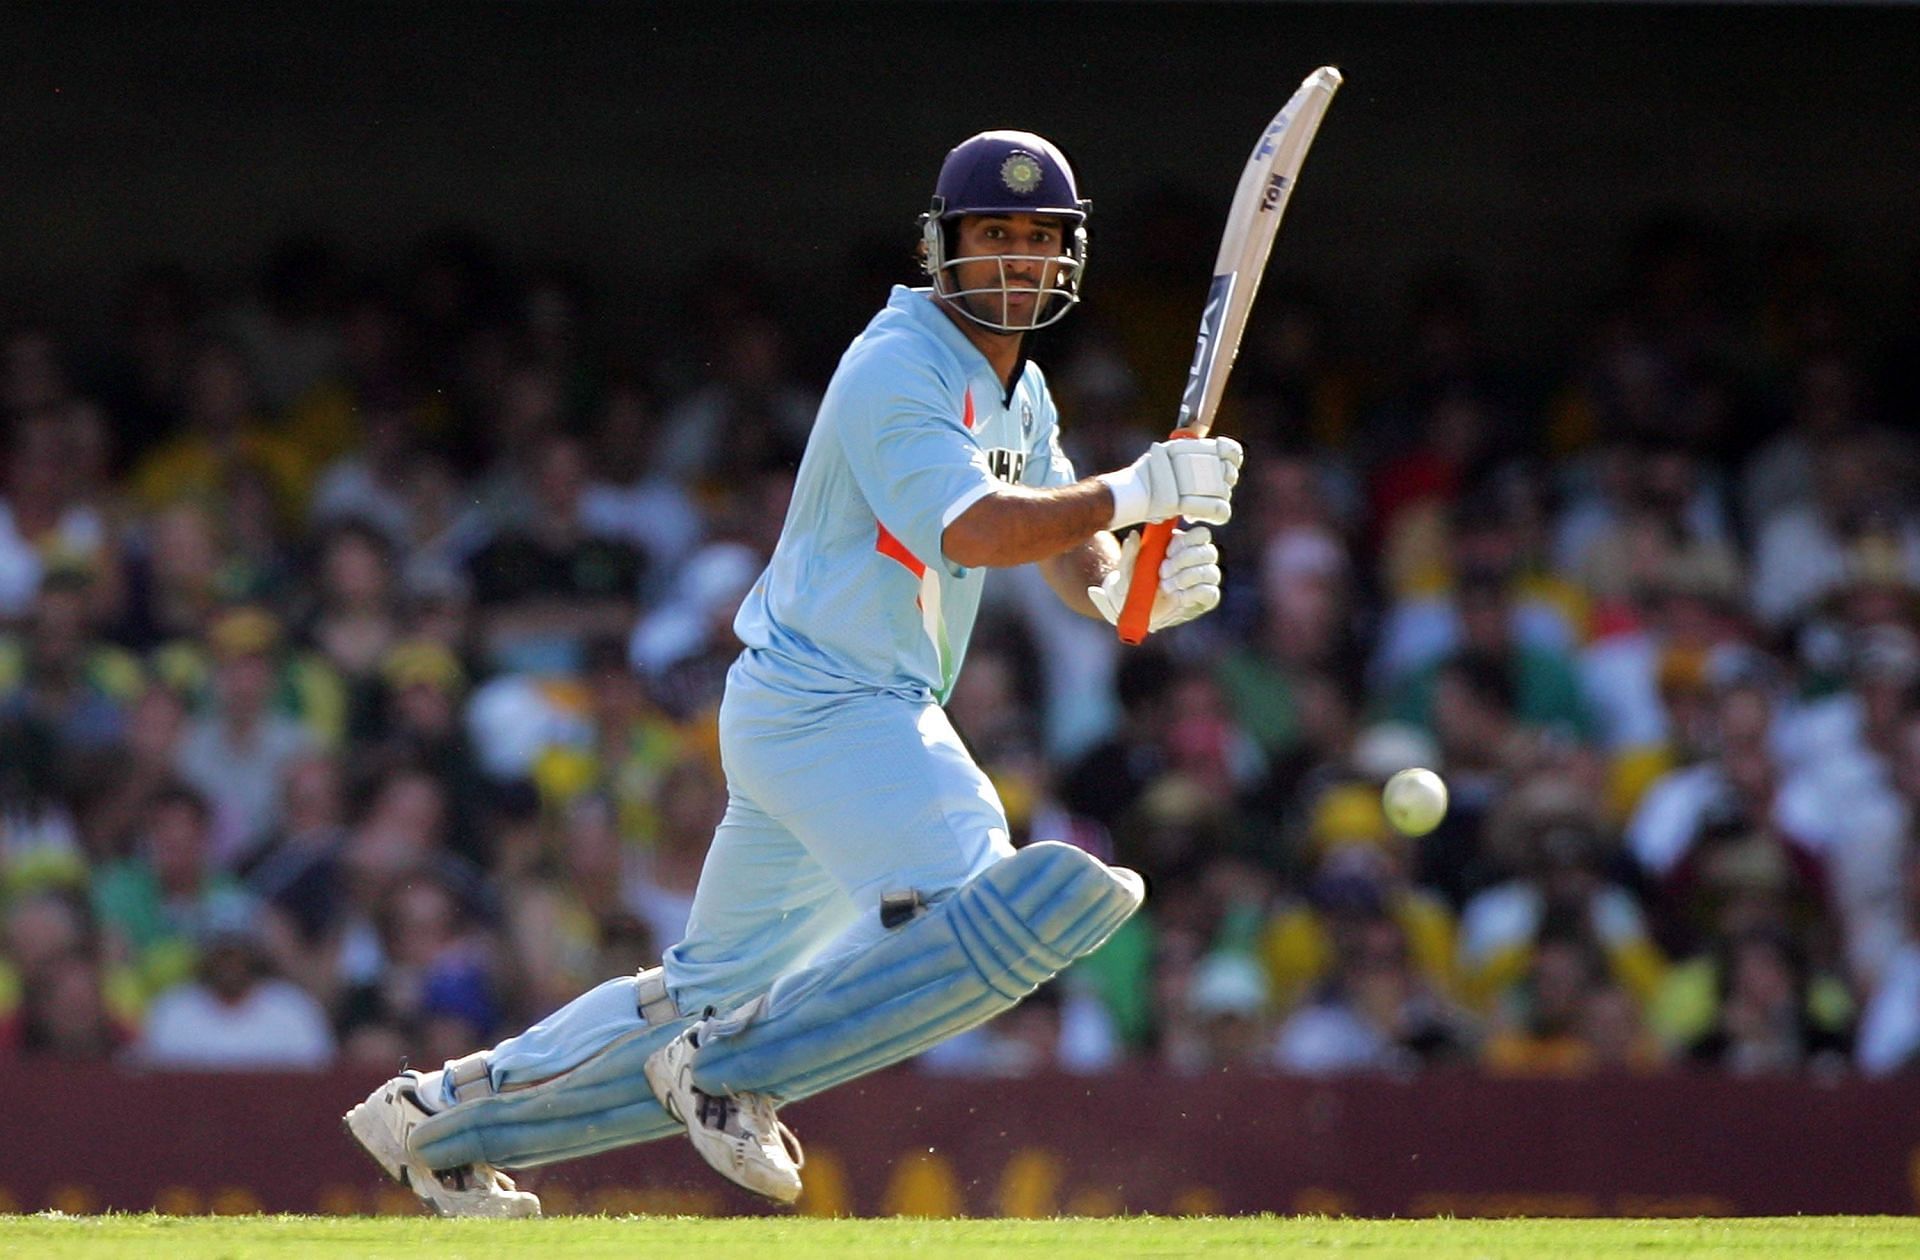 MS Dhoni scored 49 runs for India in that match